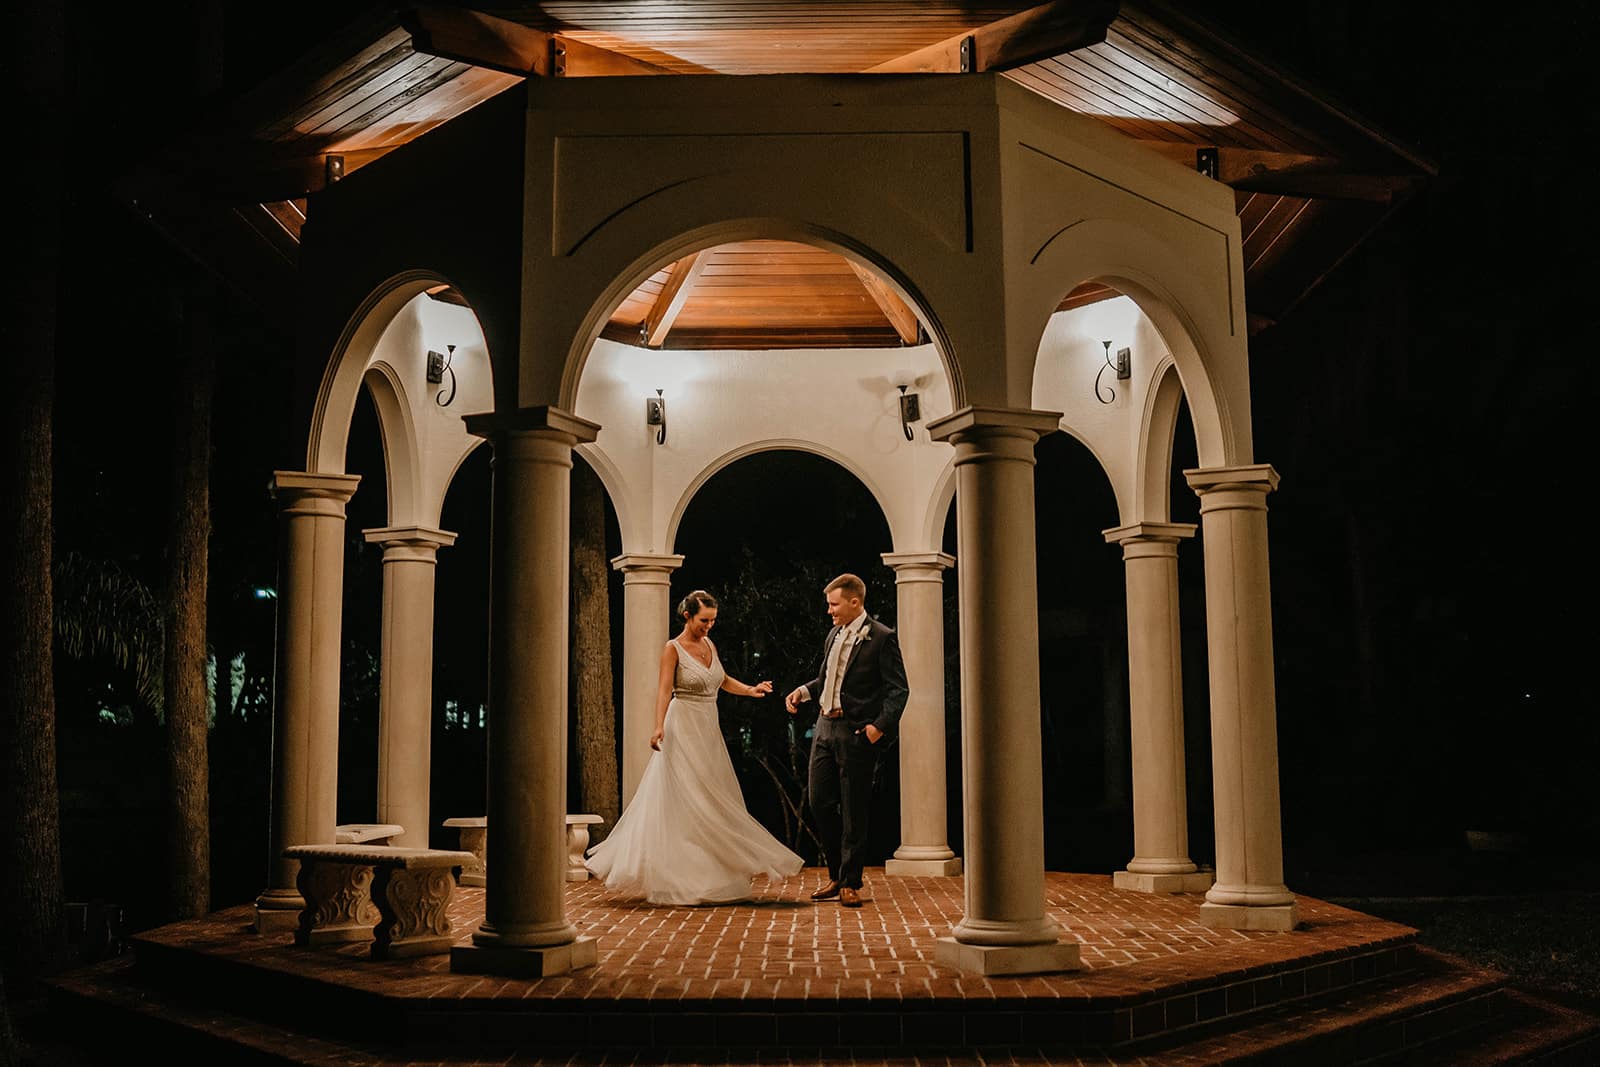 couple on wedding day at night in well lit gazebo holding hands